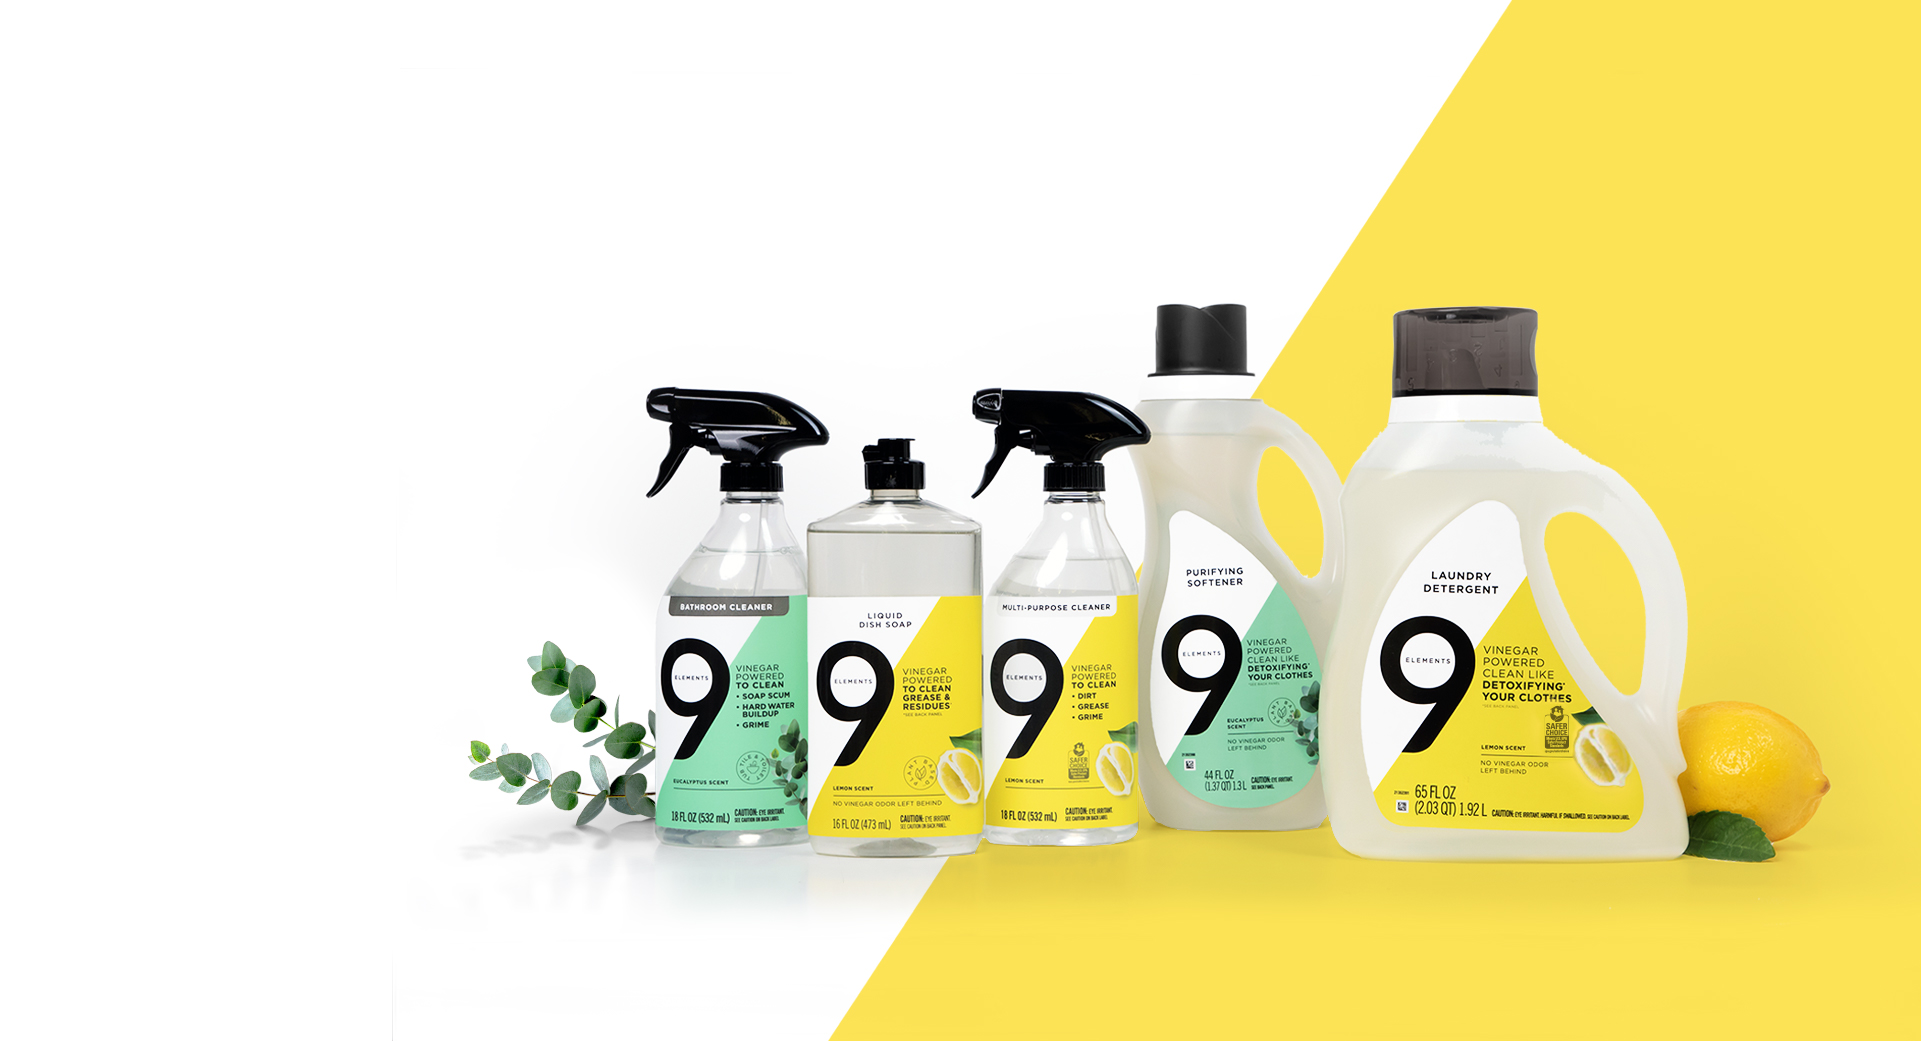 9 Elements home cleaning and laundry products and bright white towels.